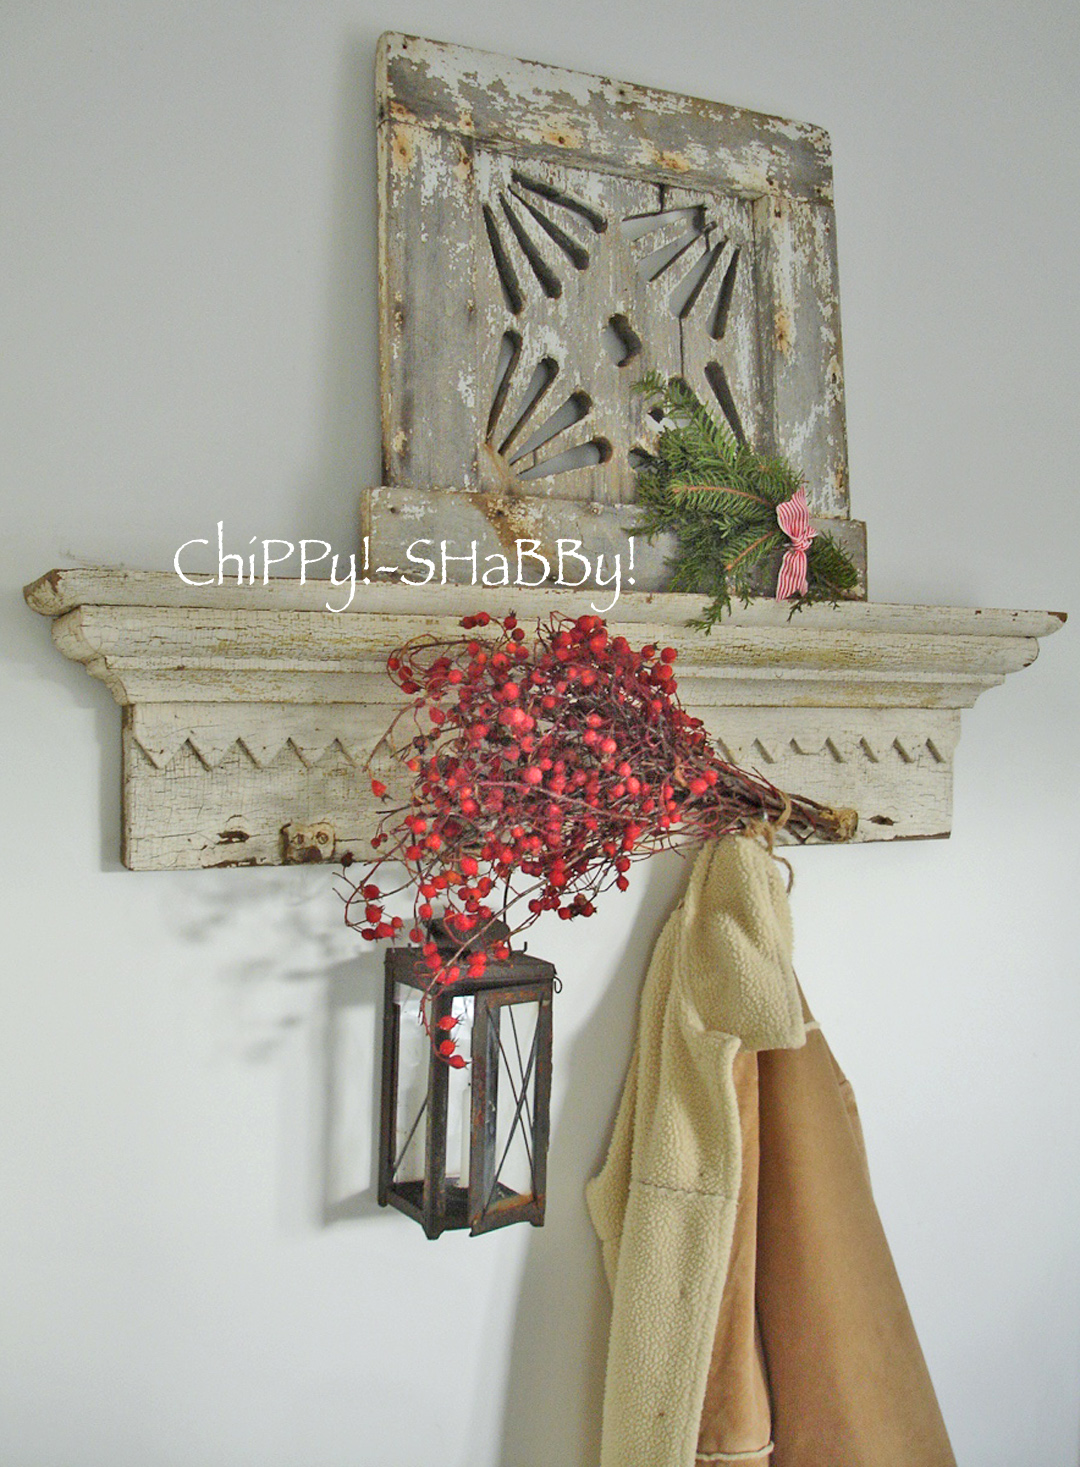 ChiPPy! - SHaBBy!: Northwind Perennial Farm - Decked Out For The ...